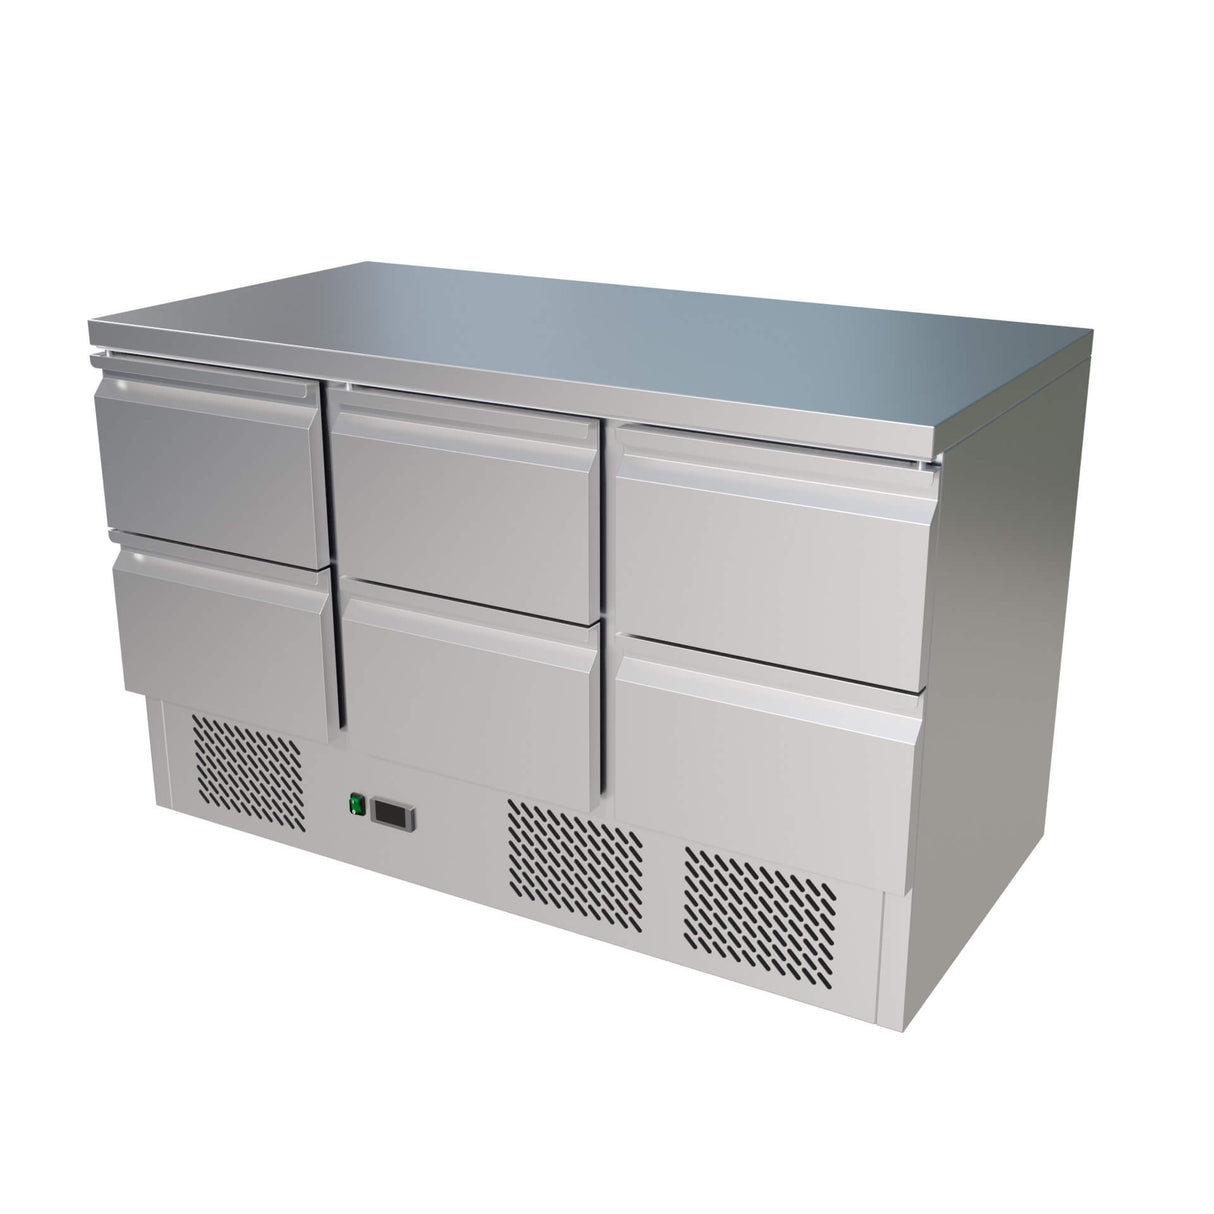 Empire Refrigerated Prep Counter With 6 x Drawers - S903-6D